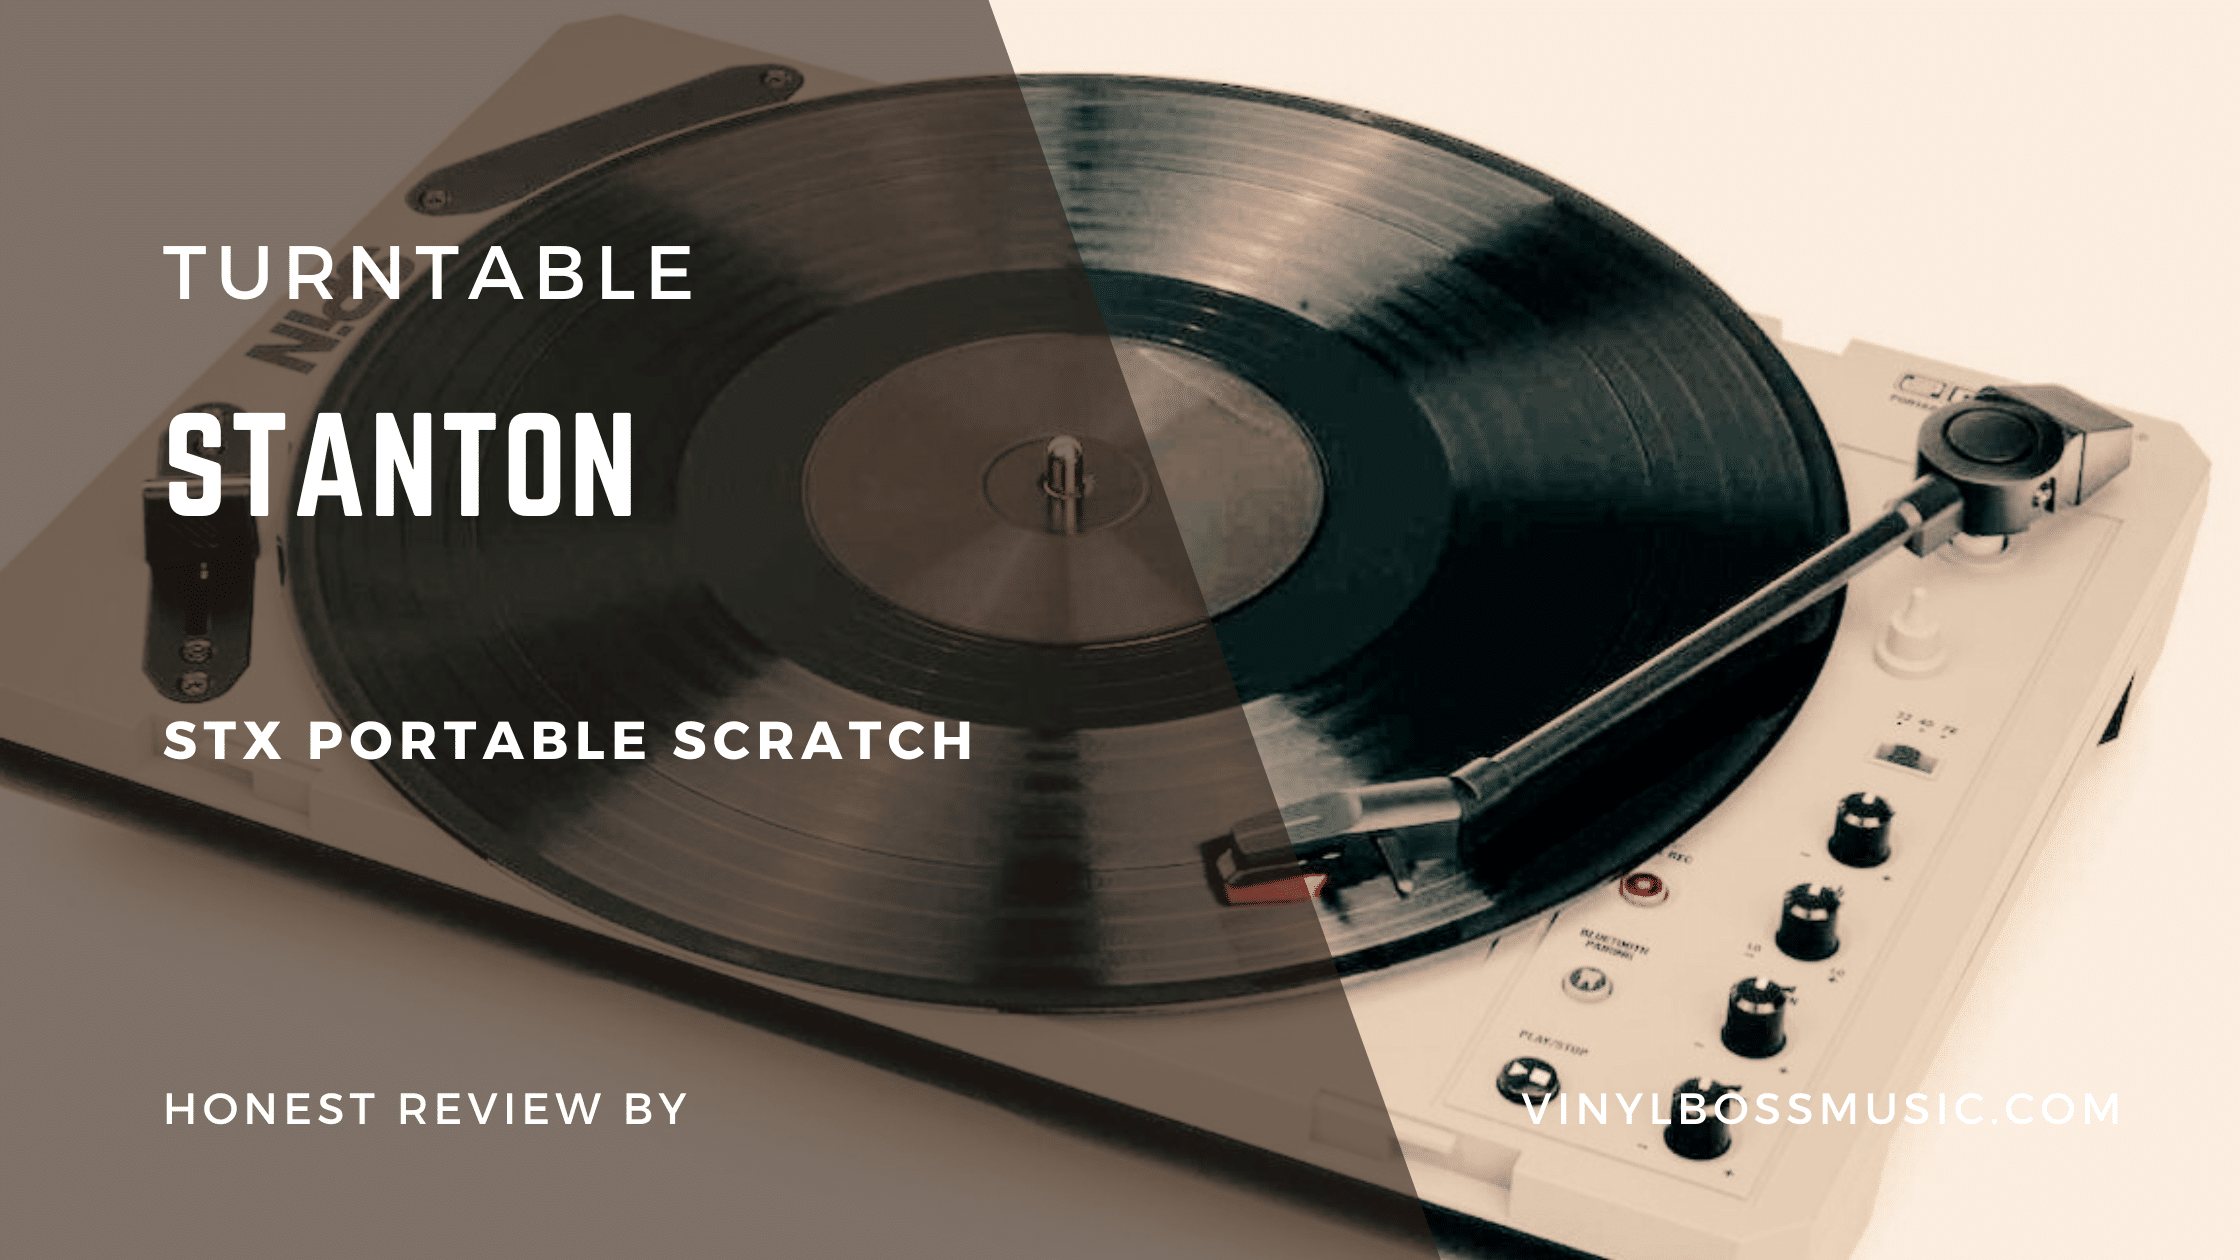 Stanton STX Portable Scratch Turntable Review